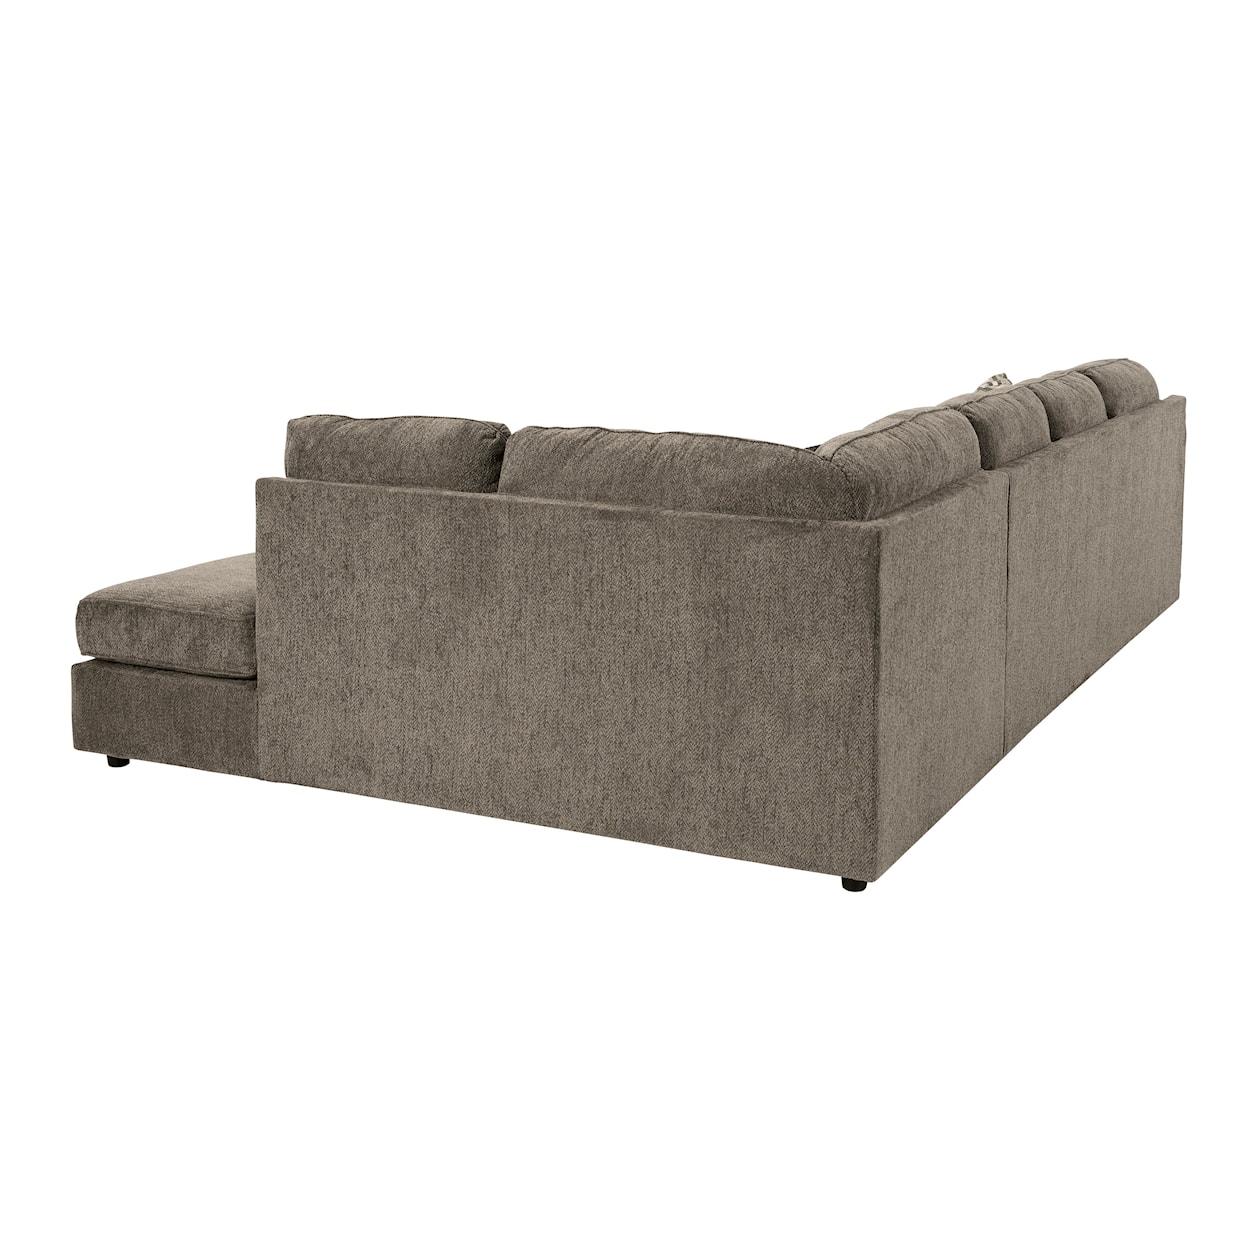 Signature Design O'Phannon 2-Piece Sectional with Chaise